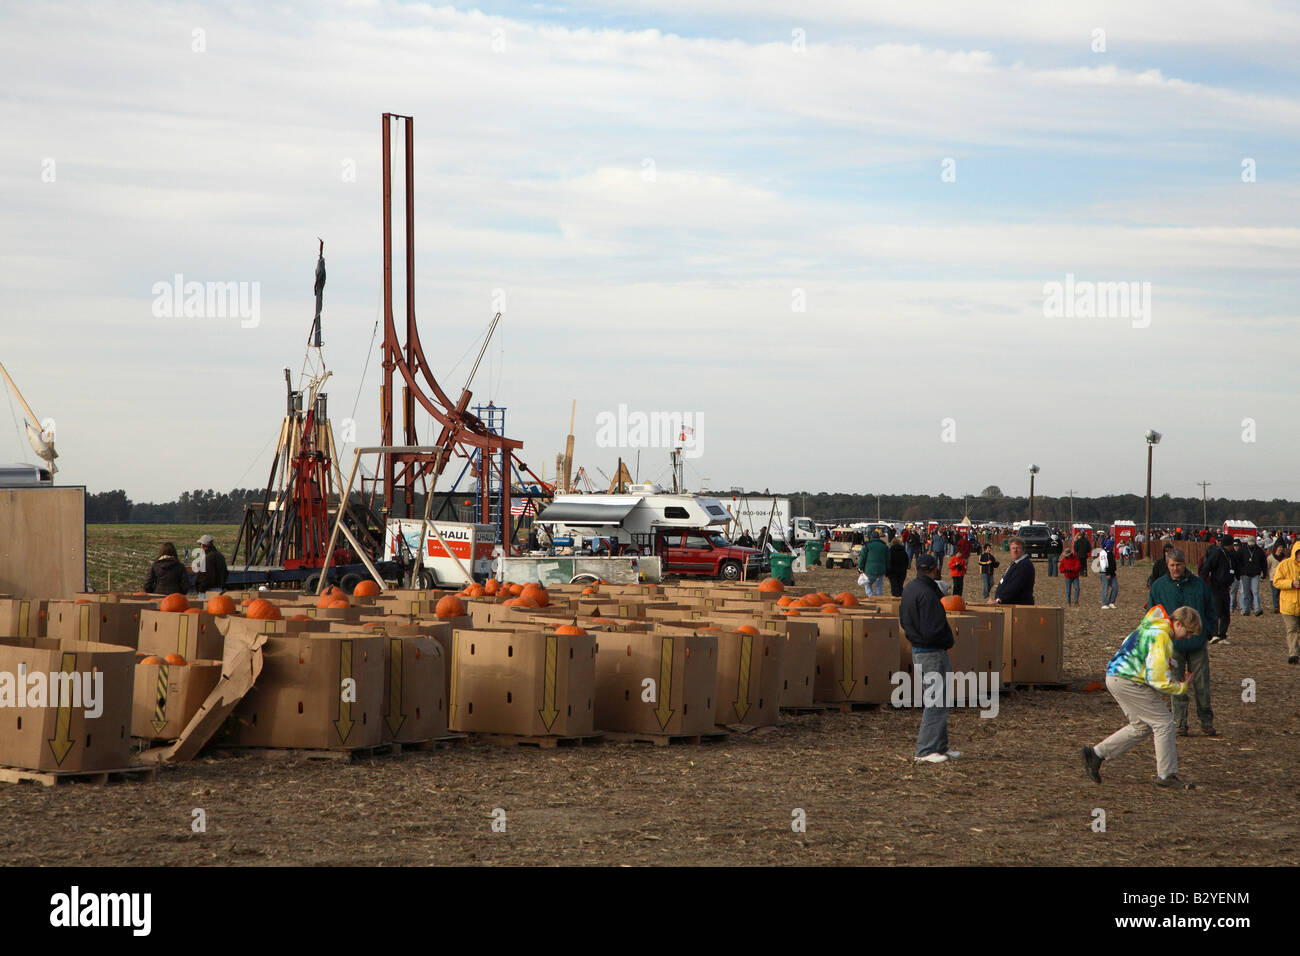 Variety of pumpkin hurling machines with supporting vehicles fronted by large number of cardboard boxes holding pumpkins. Stock Photo